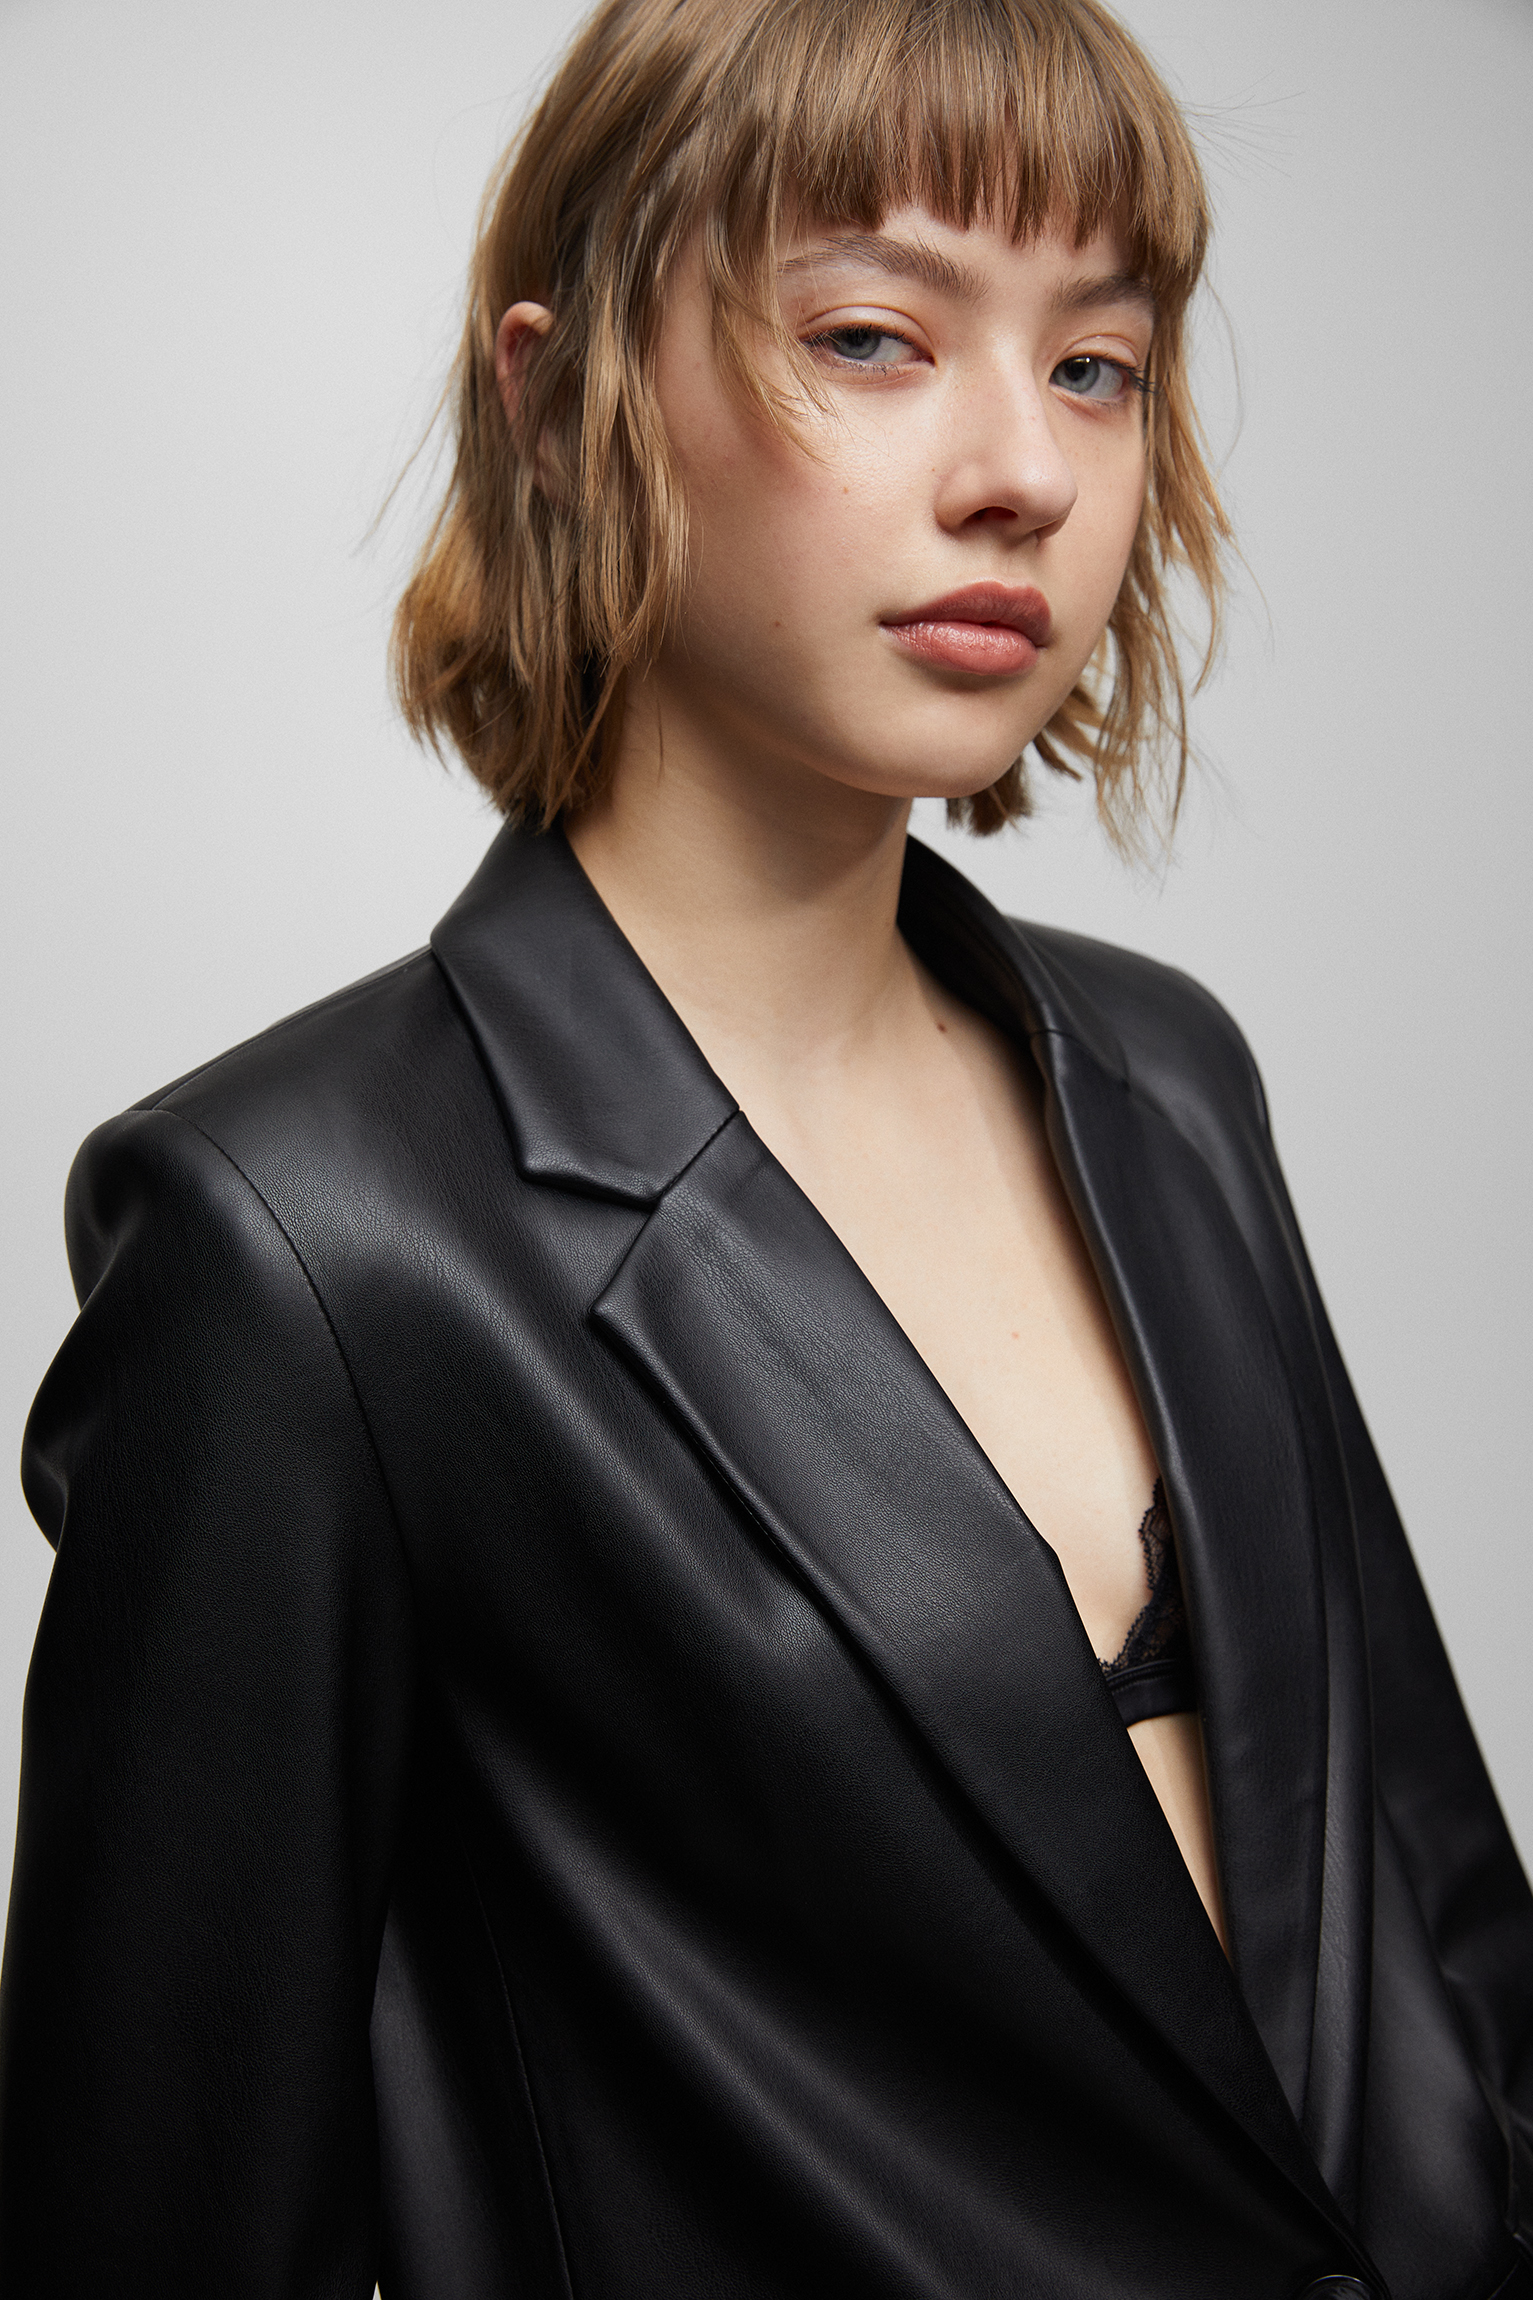 Faux Leather Blazer With A Pocket, £39.99, Pull&Bear